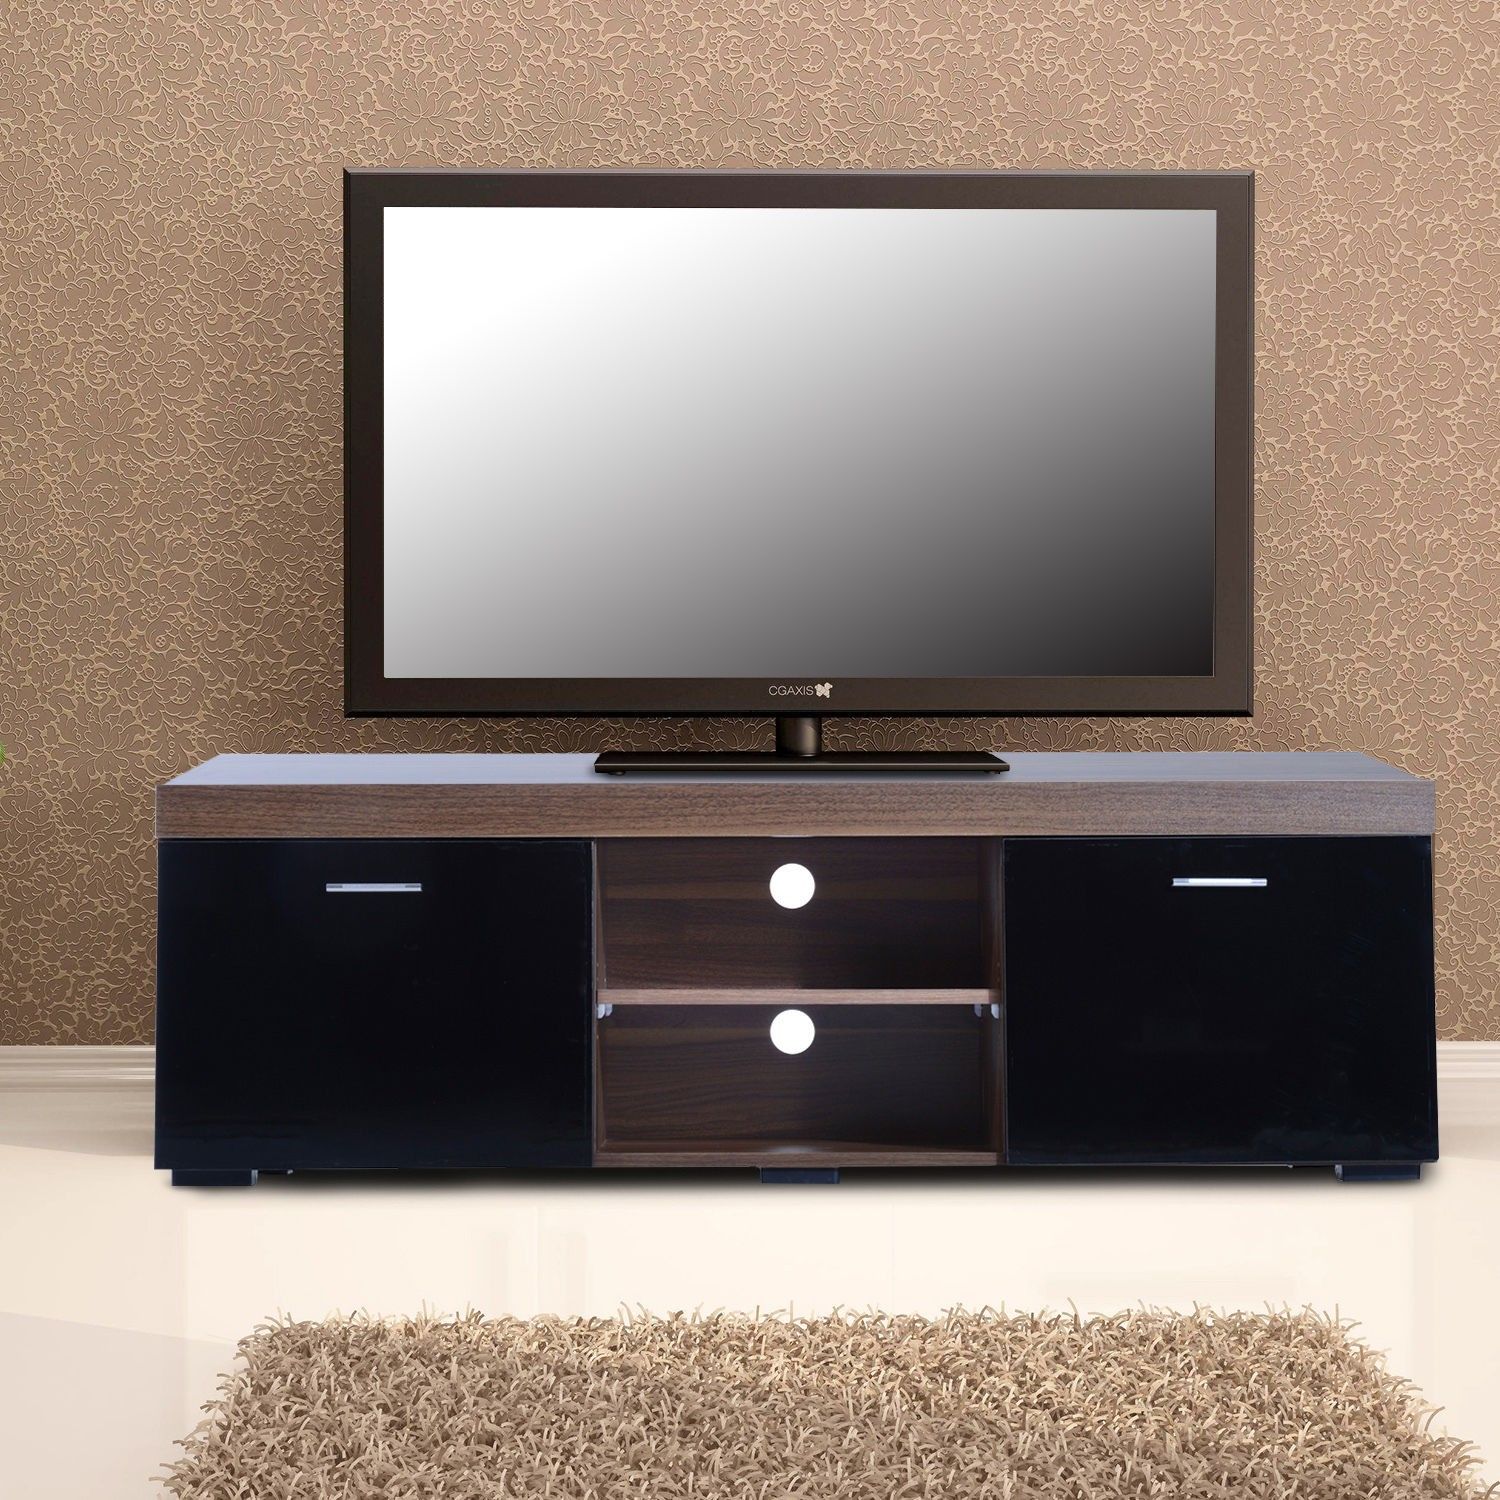 Homcom Tv Stand Storage Cabinet W/ Shelves Walnut/black Intended For Cabinet Tv Stands (View 3 of 15)